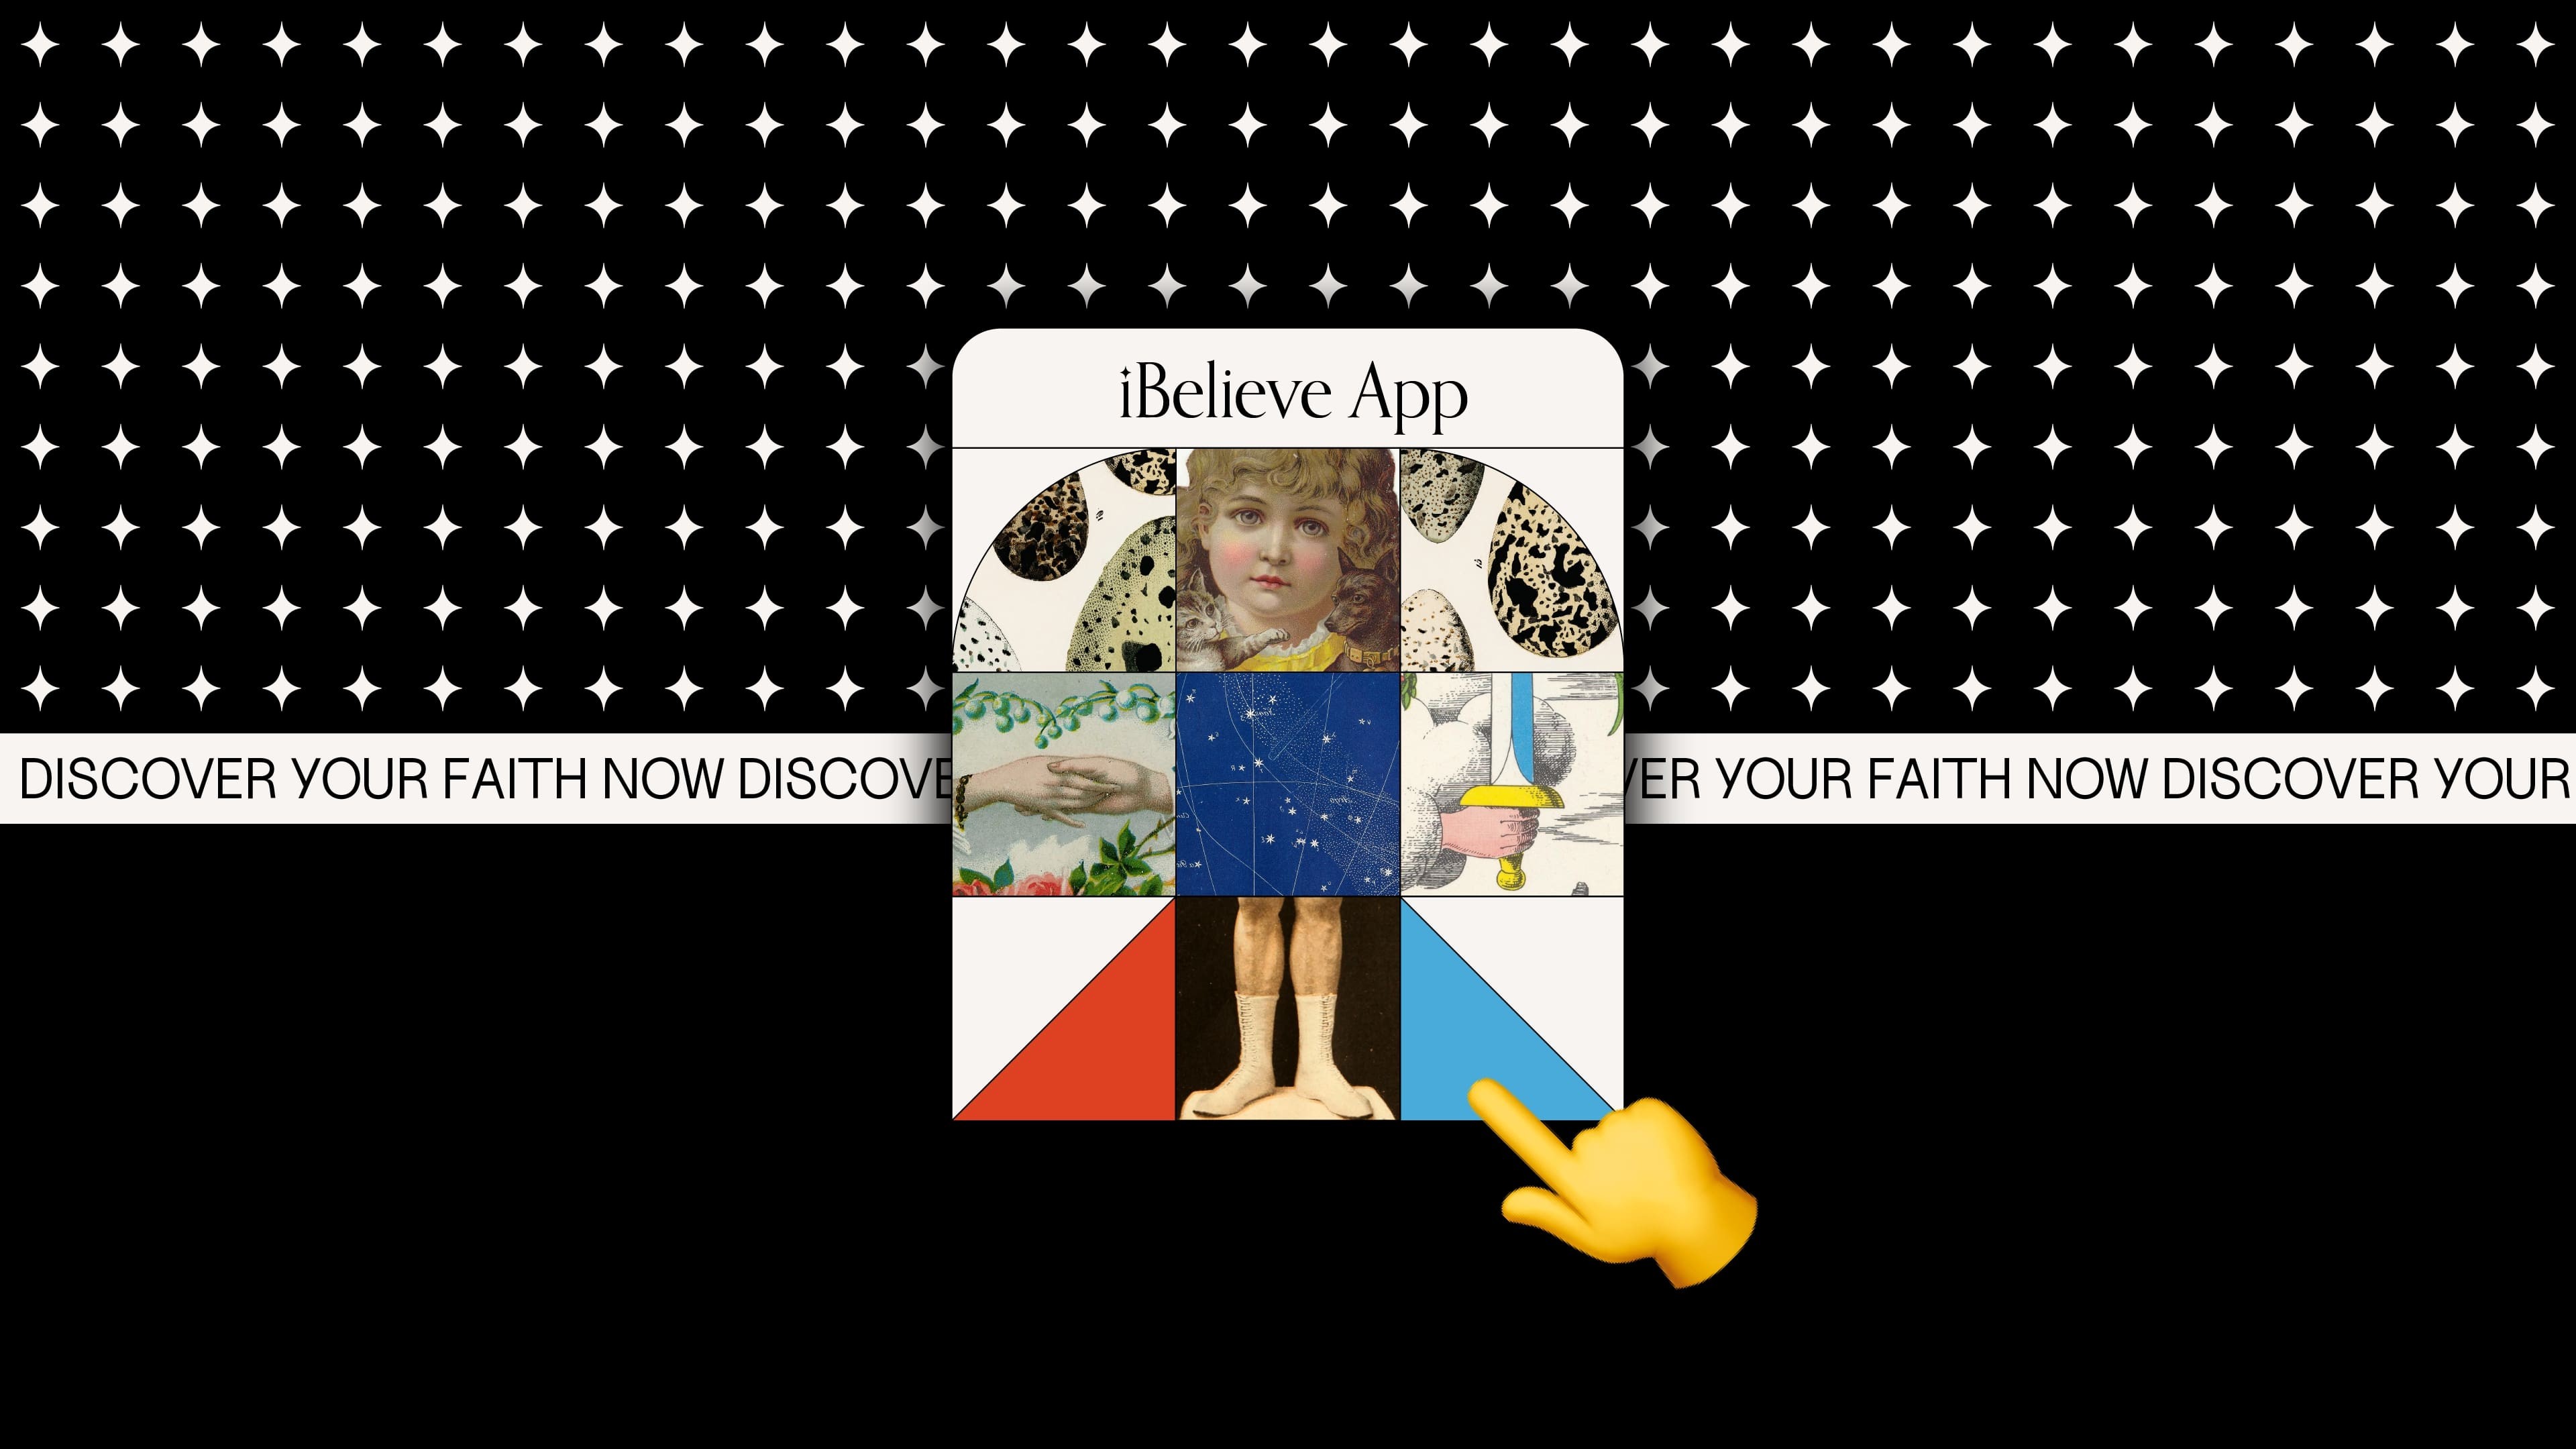 The picture shows the performative presentation of the app iBelieve.